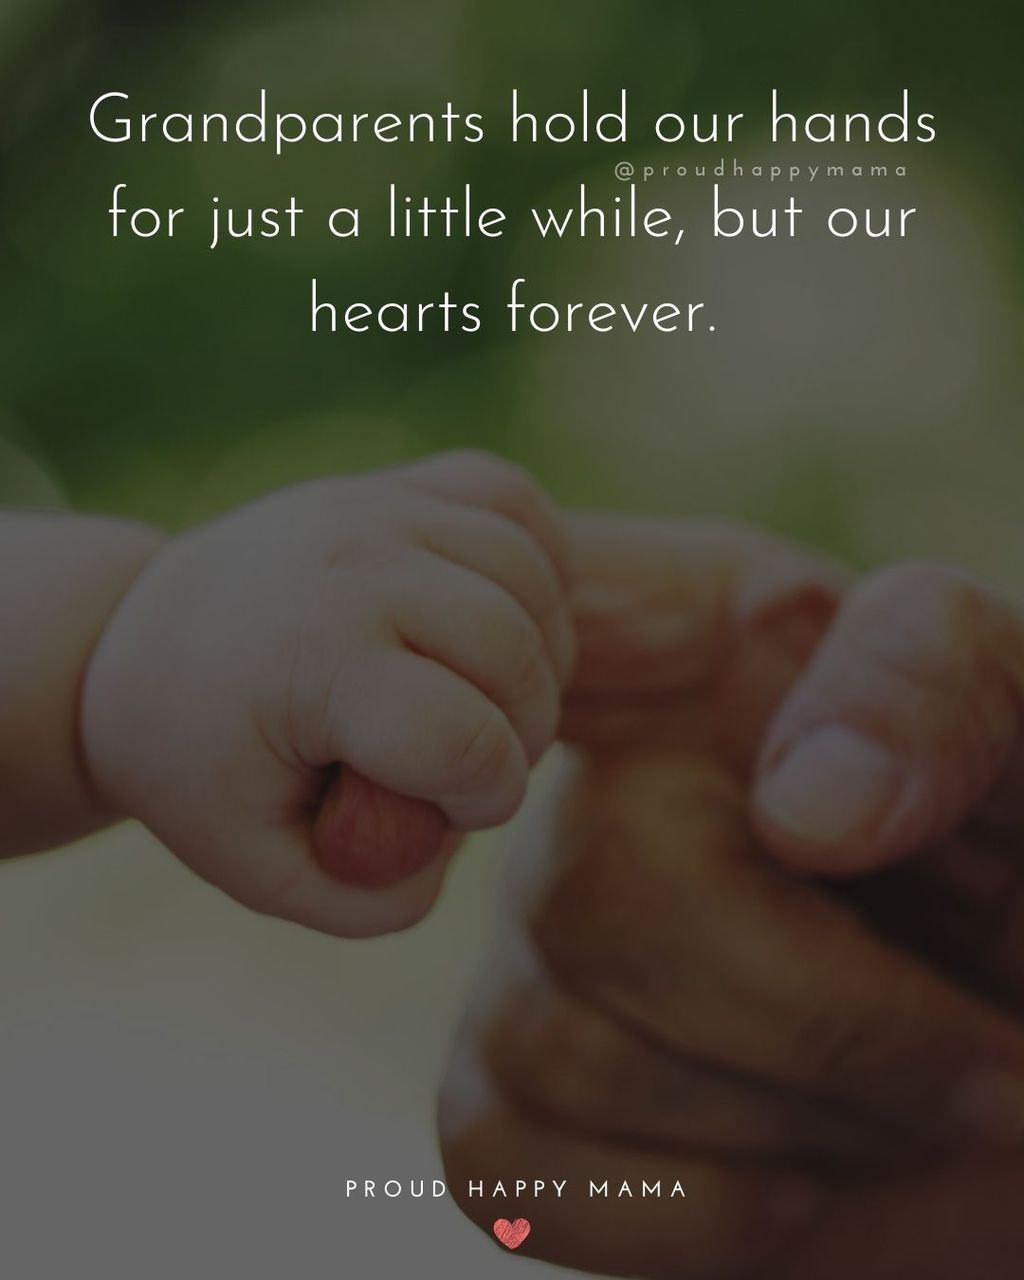 First Time Grandparents Quotes | Grandparents hold our hands for just a little while, but our hearts forever.